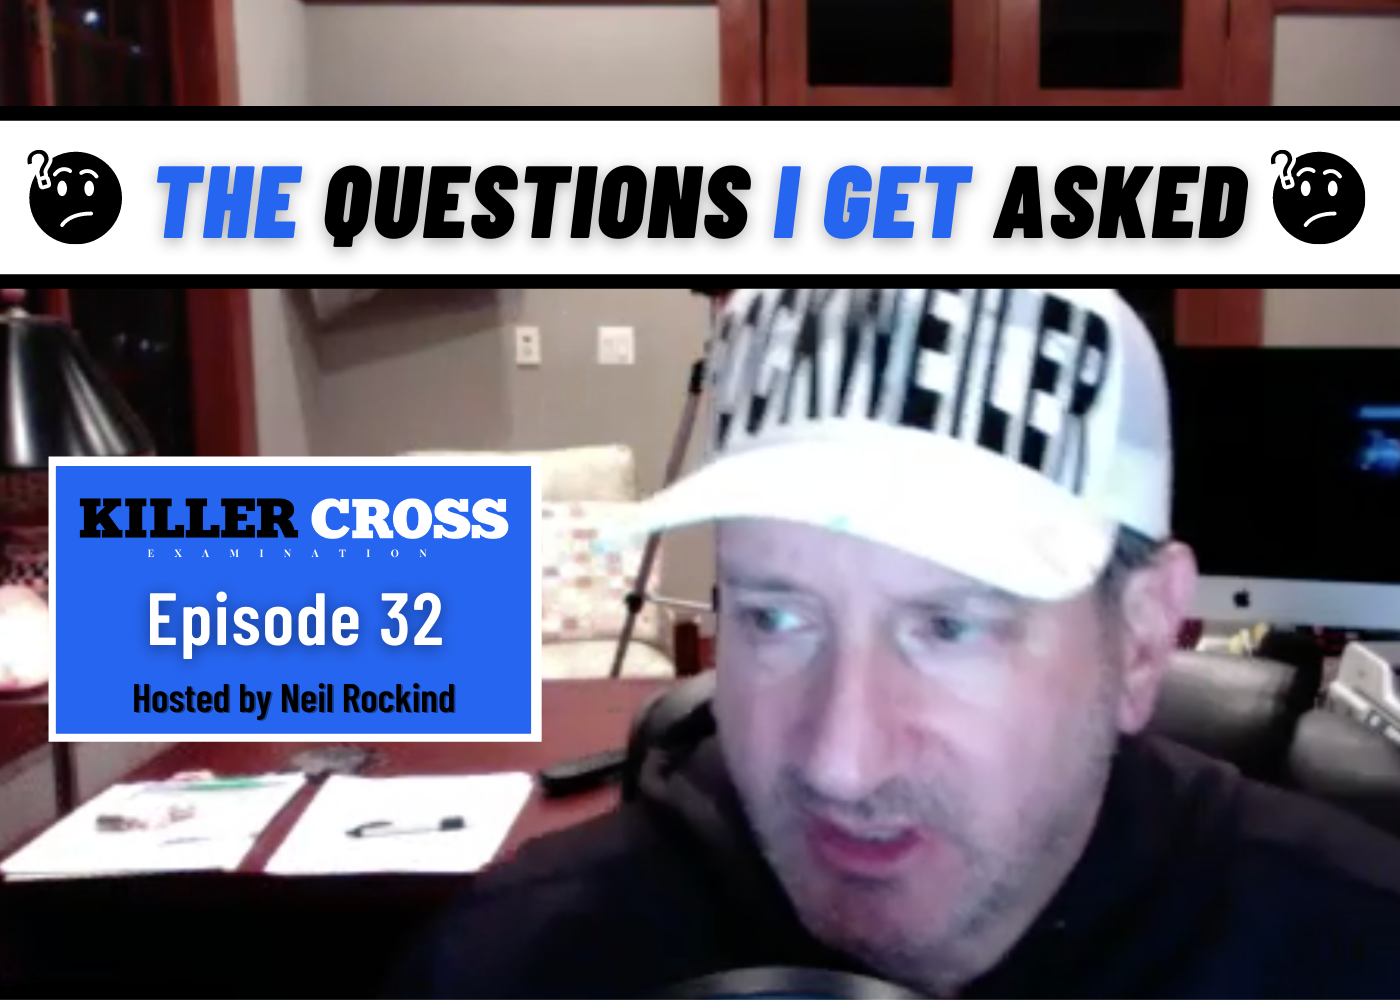 Episode 32: The Questions I Get Asked